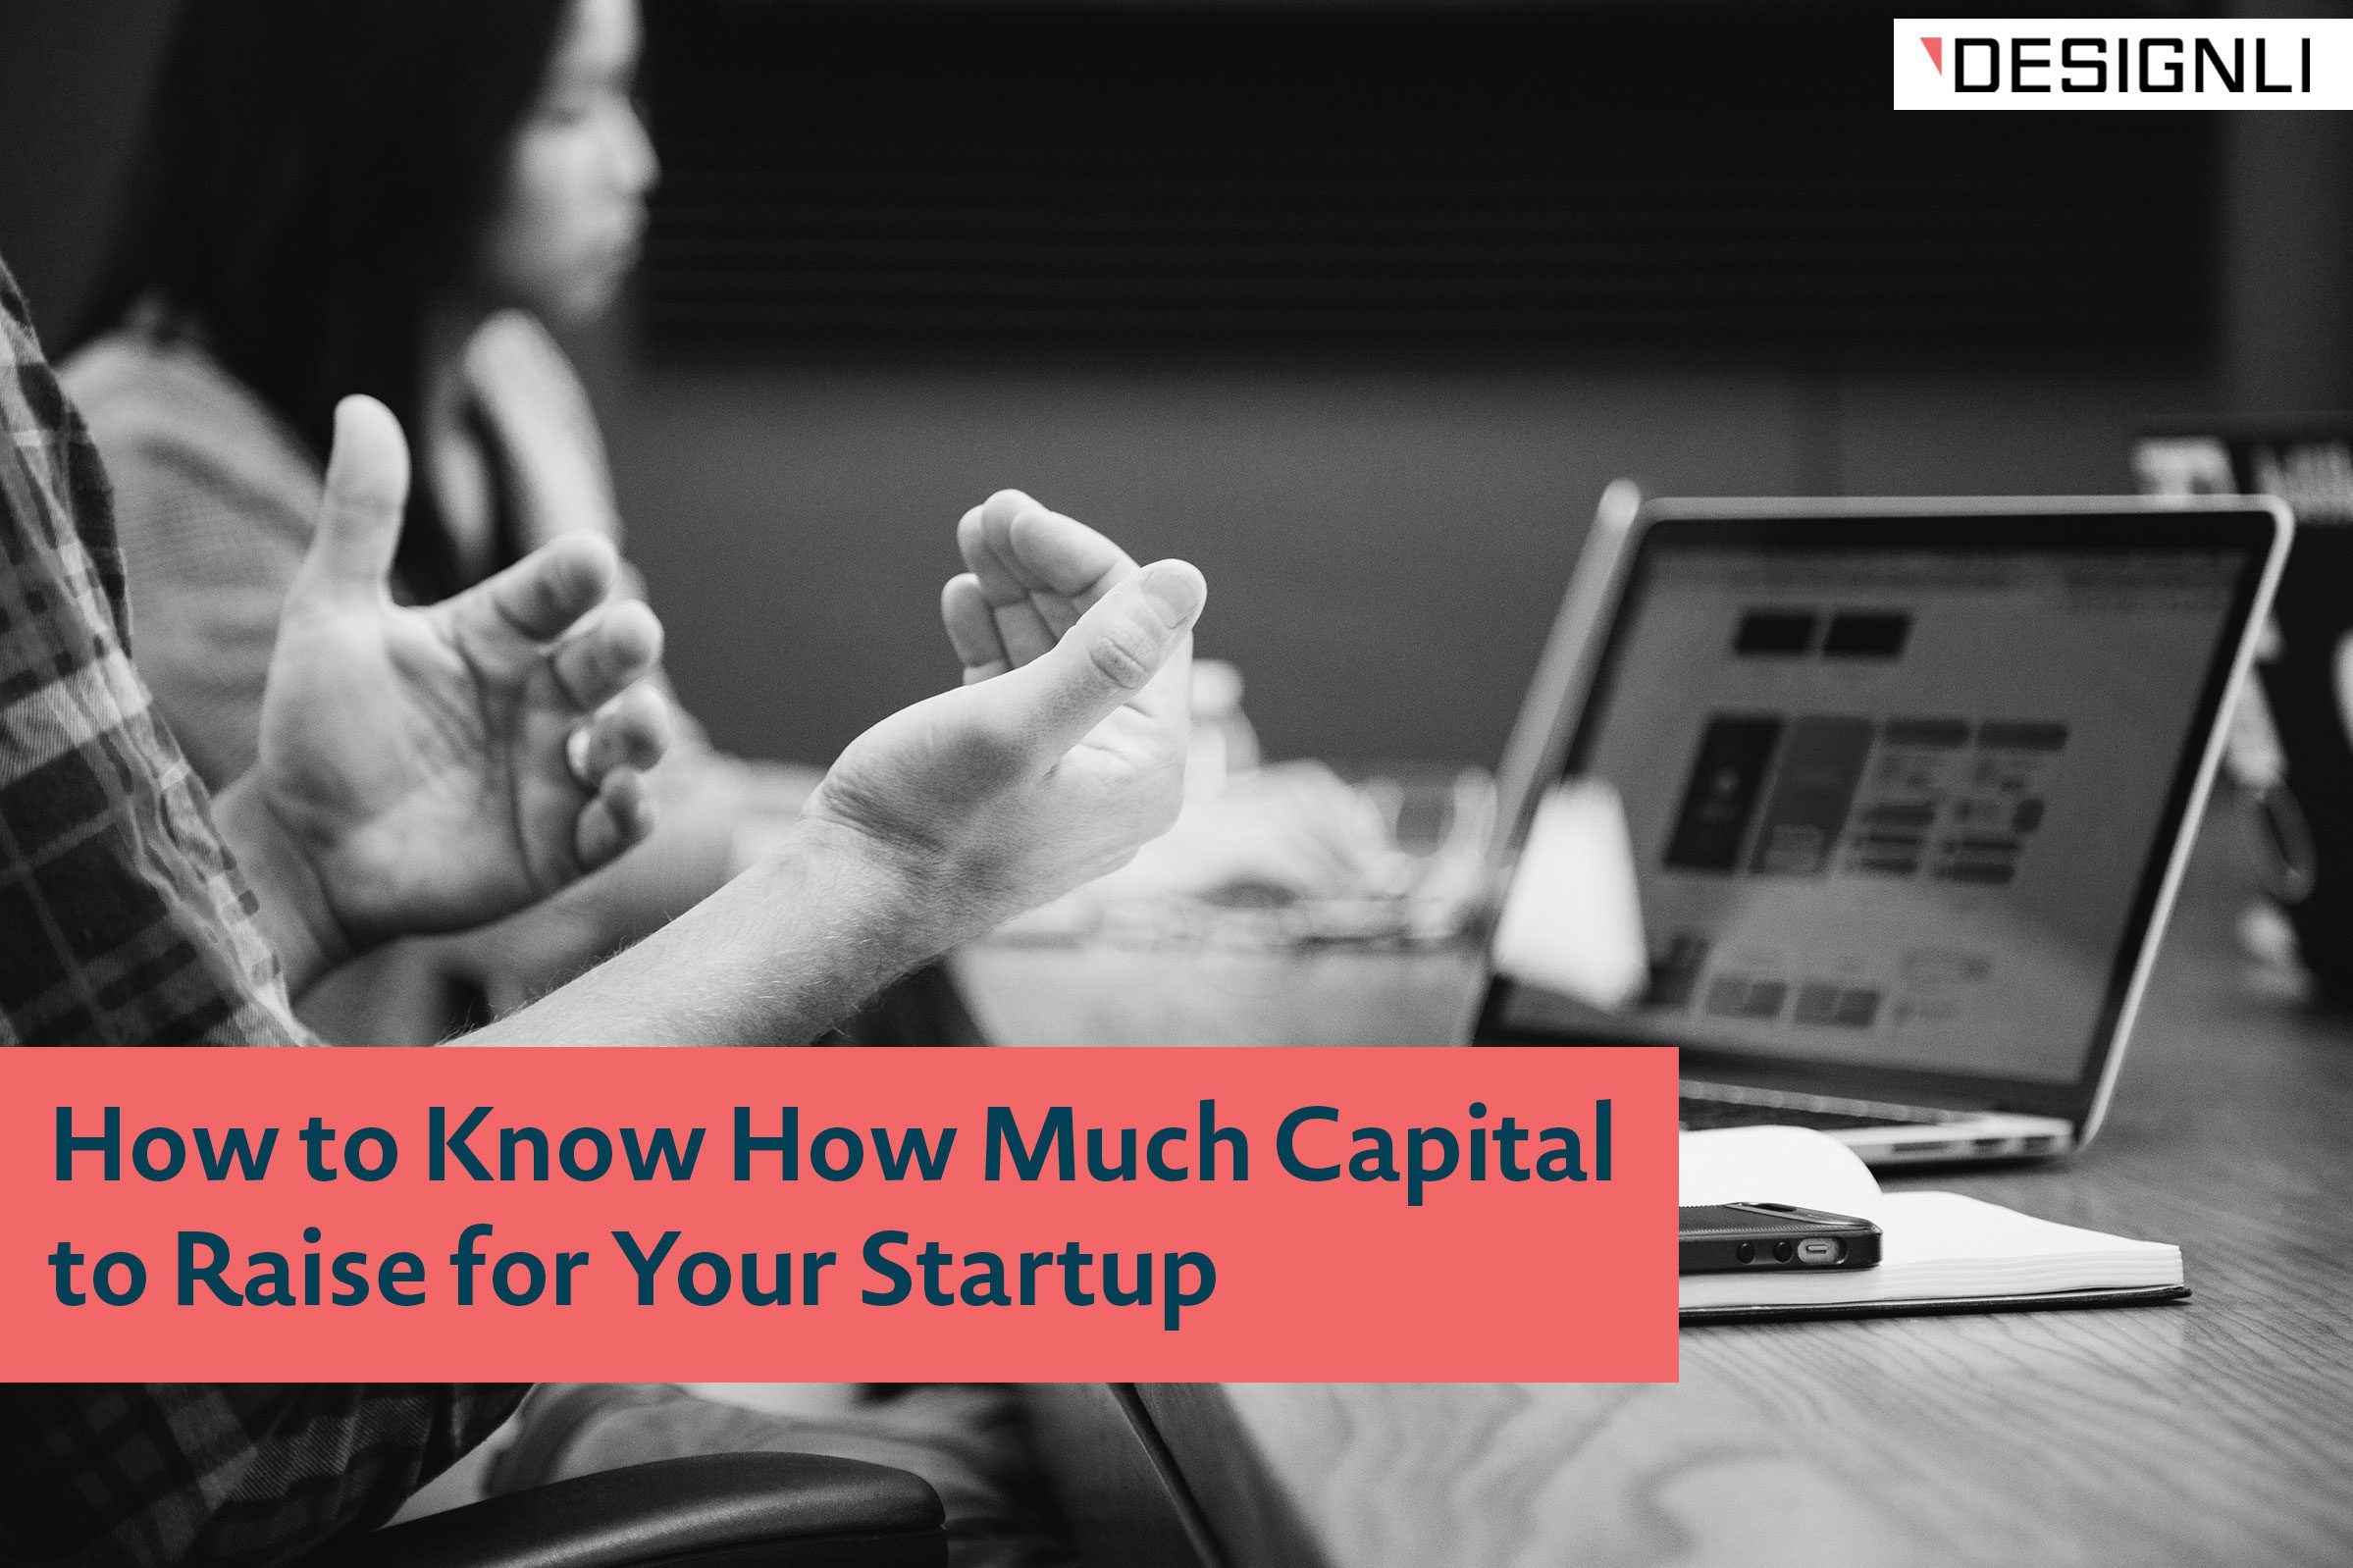 How to Know How Much Capital to Raise for Your Startup